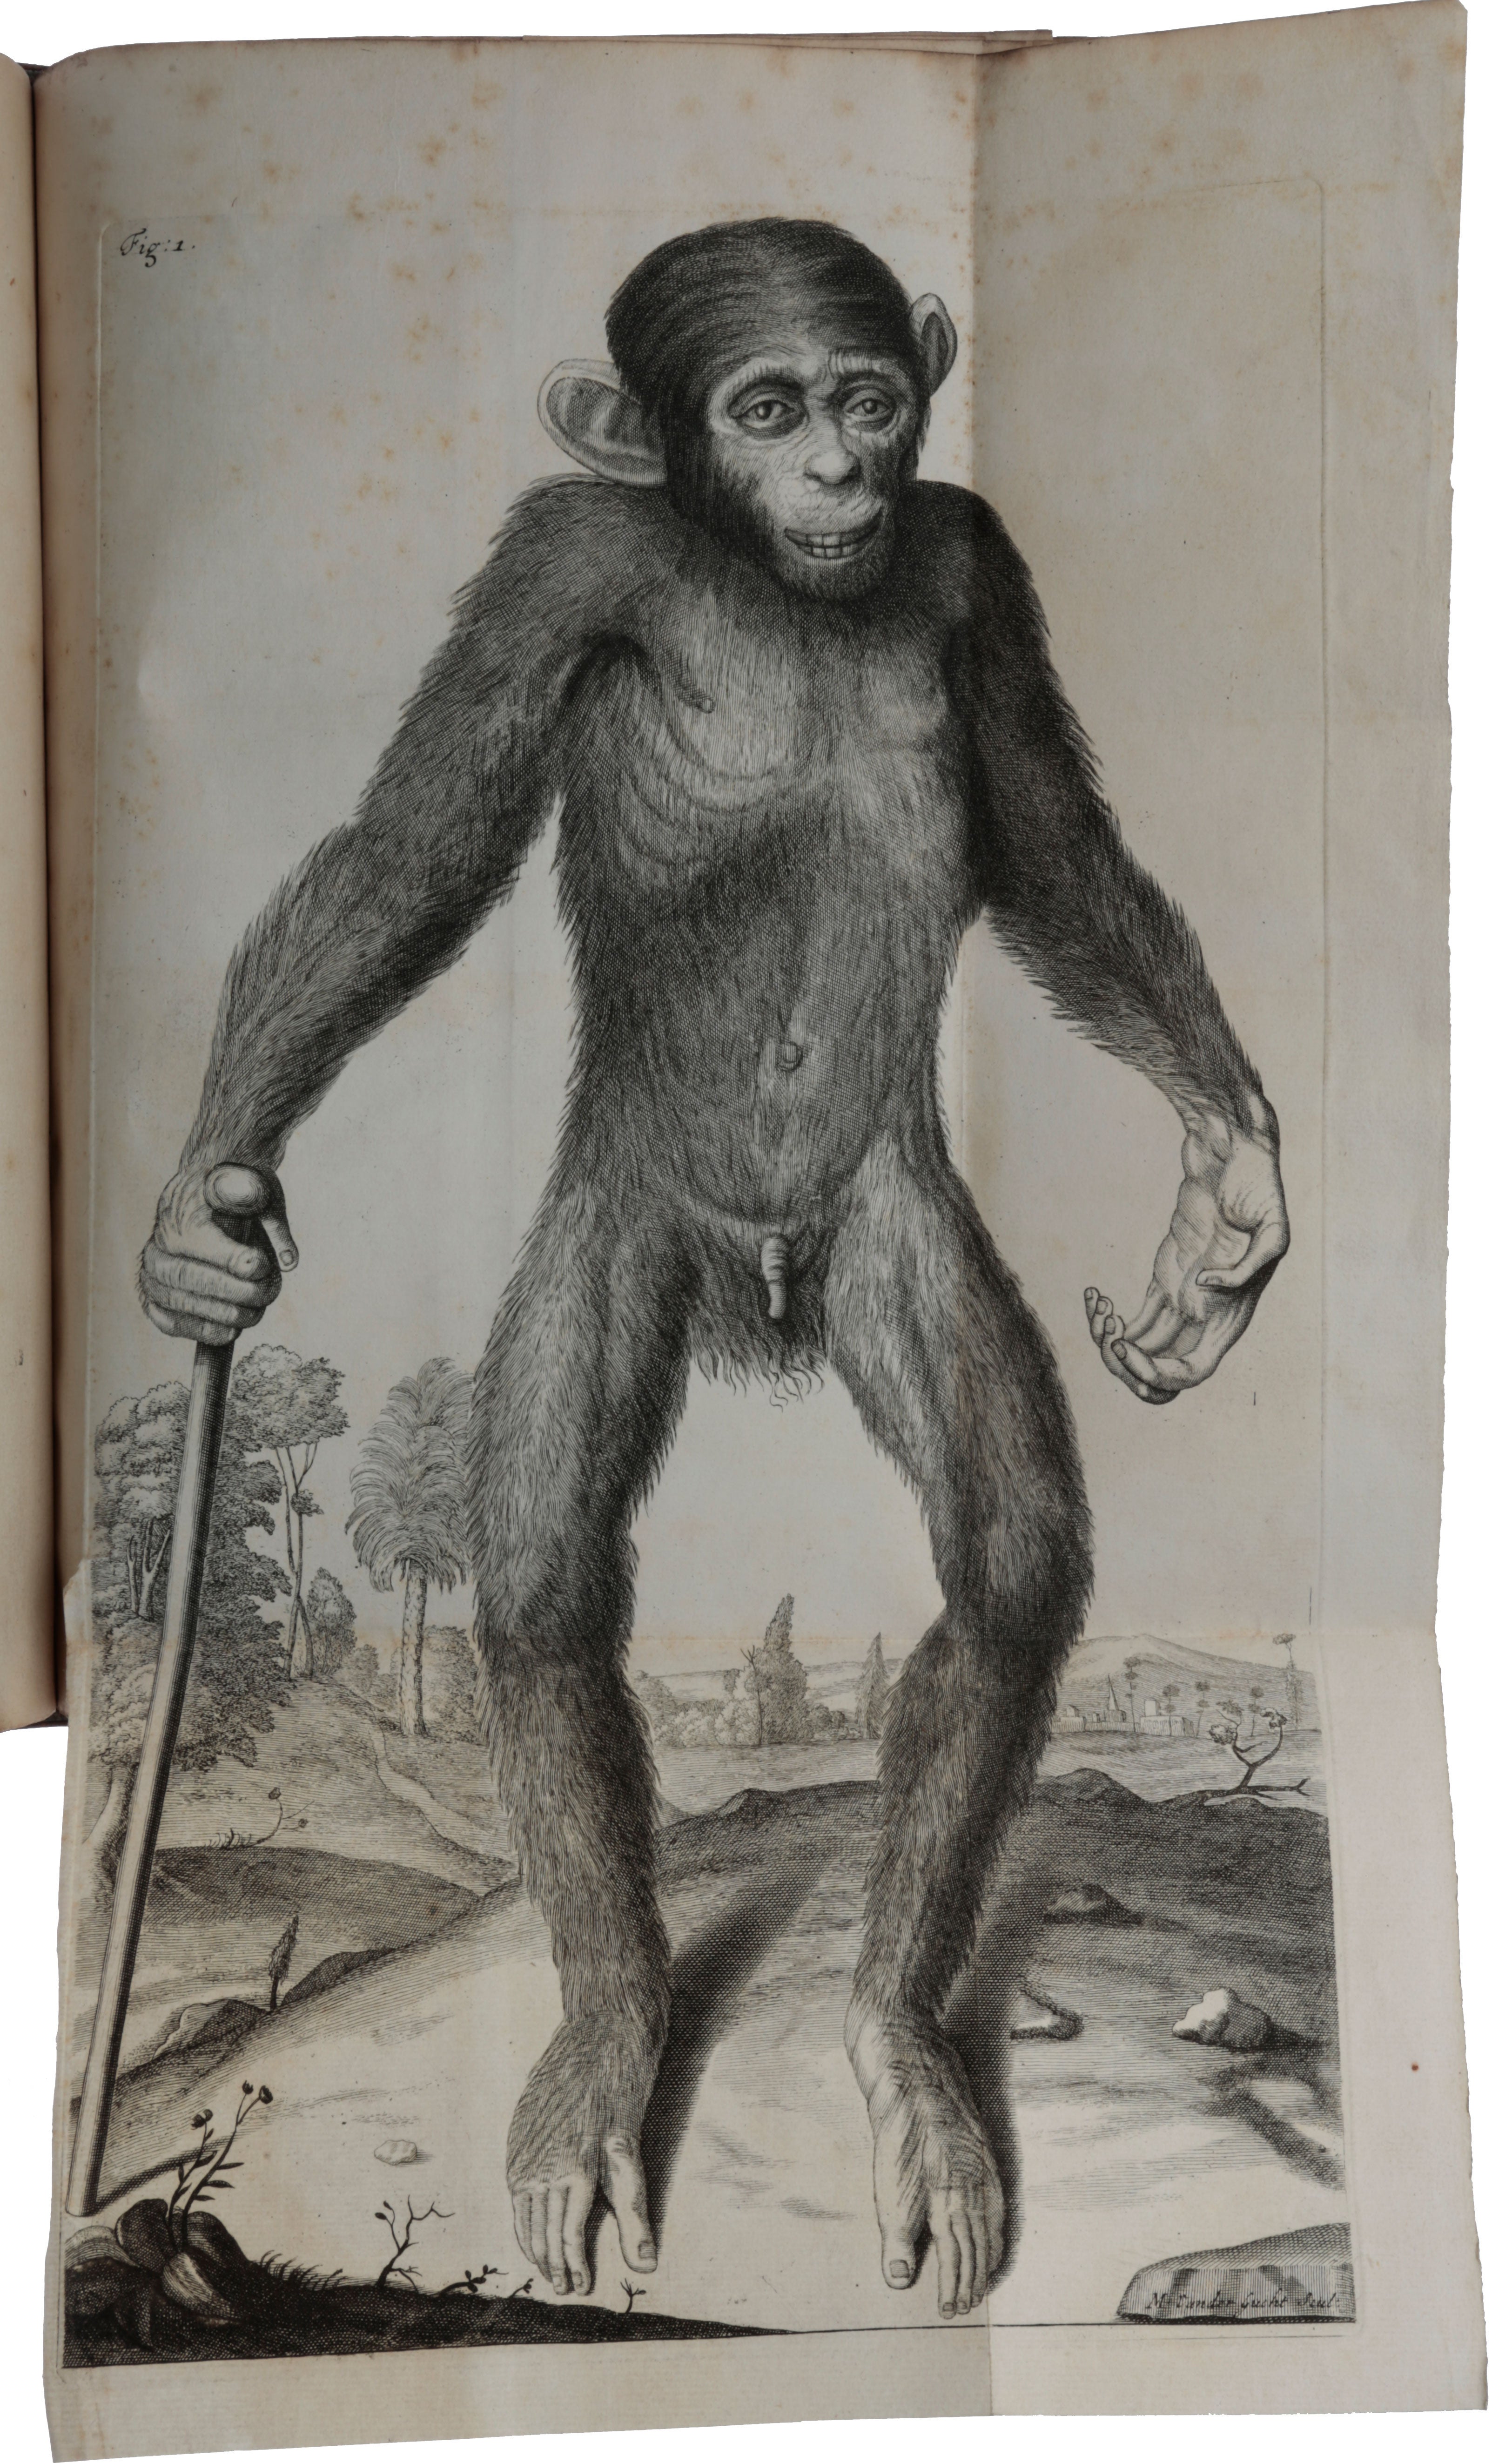 Item #5291 Orang-Outang, sive homo sylvestris; or, the anatomie of a pygmie compared with that of a monkey, an ape and a man. To which is added, a philological essay concerning the pygmies, the cynocephali, the satyrs, and sphinges of the Ancients. Wherein it will appear that they are all either apes or monkeys, and not men, as formerly pretended. Edward TYSON.